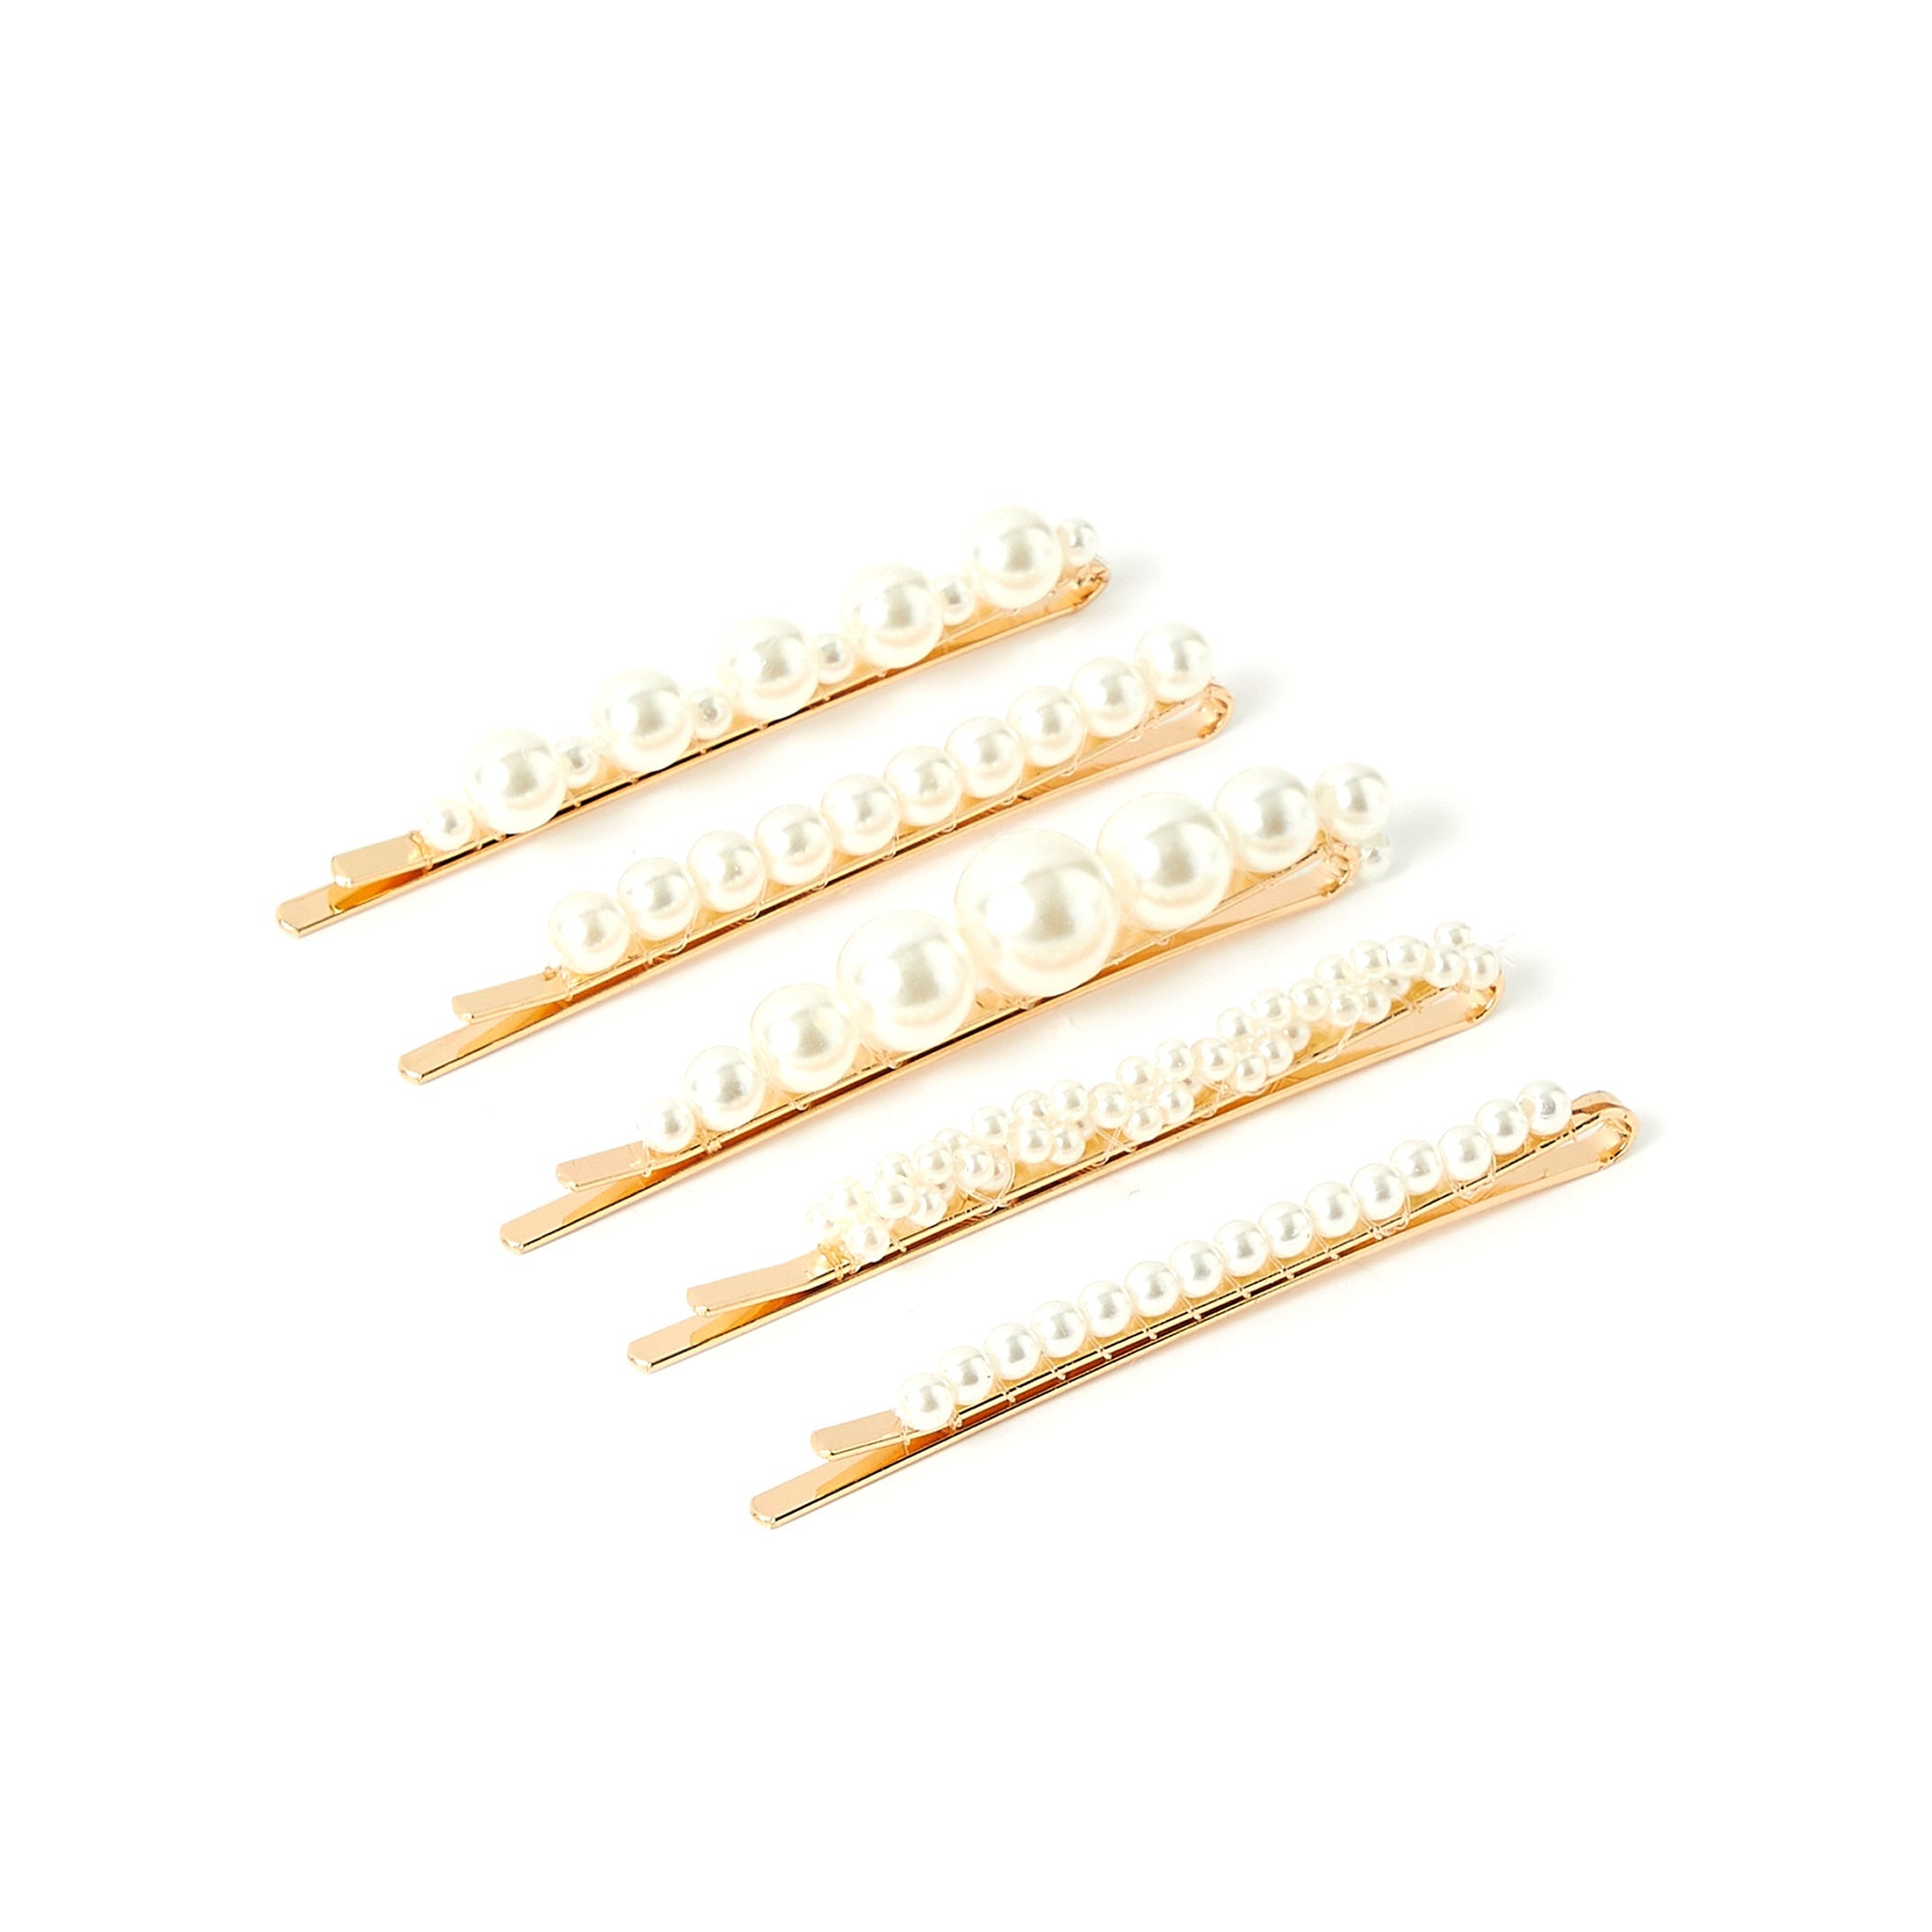 Accessorize London Women's Set of 5 Mixed Pearly Slides Hair Clip Pack